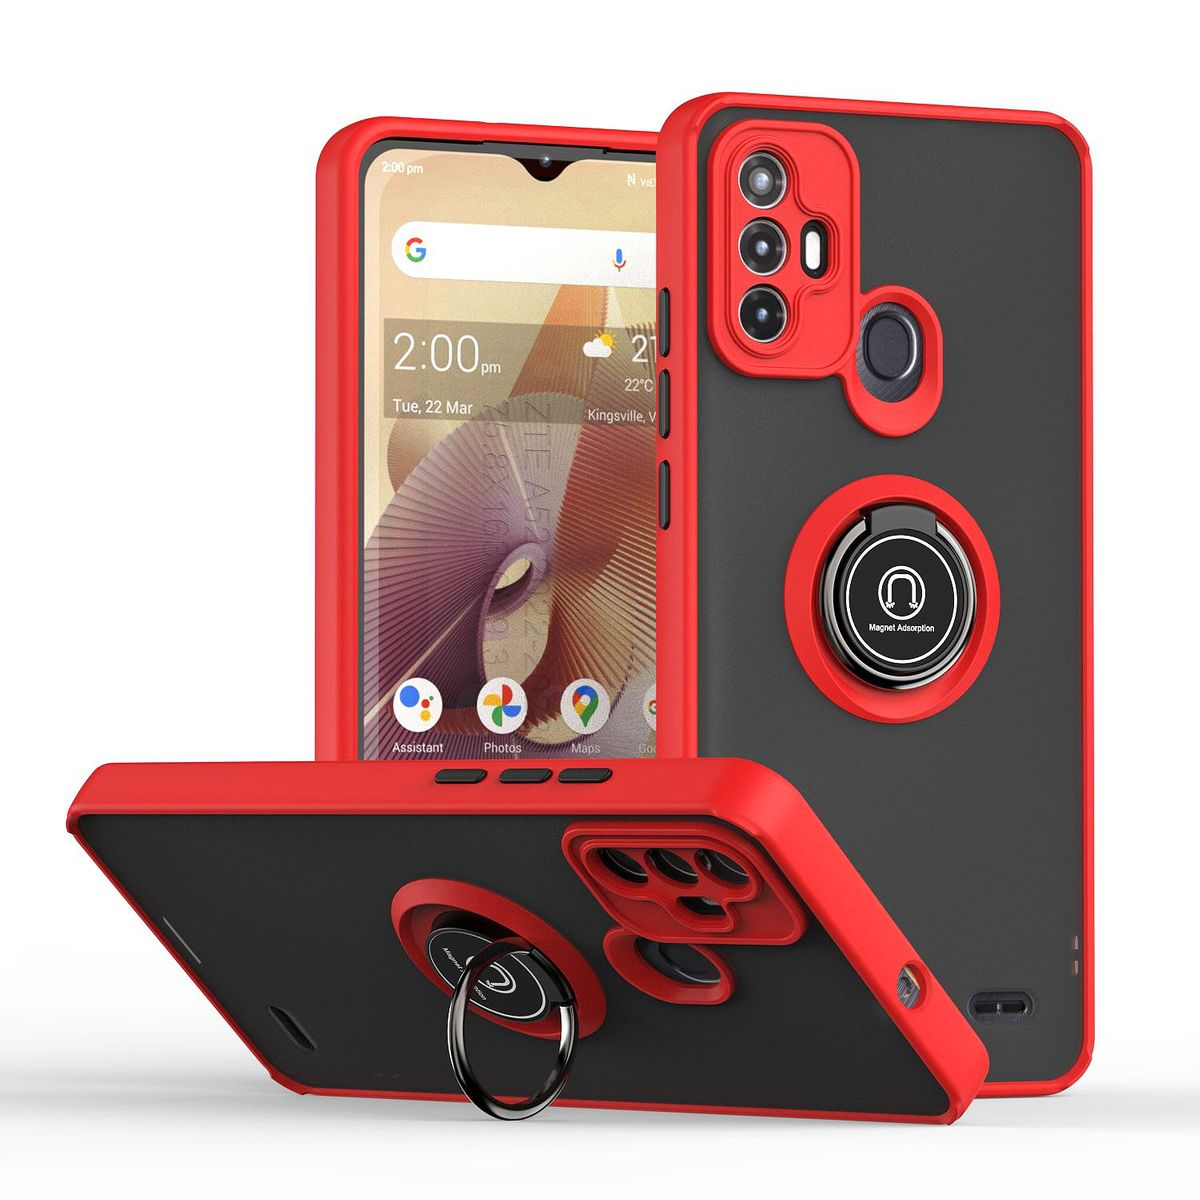 WIGENTO TPU / PC Design / A52, ZTE, Rot Schwarz Ring Backcover, Blade Hülle